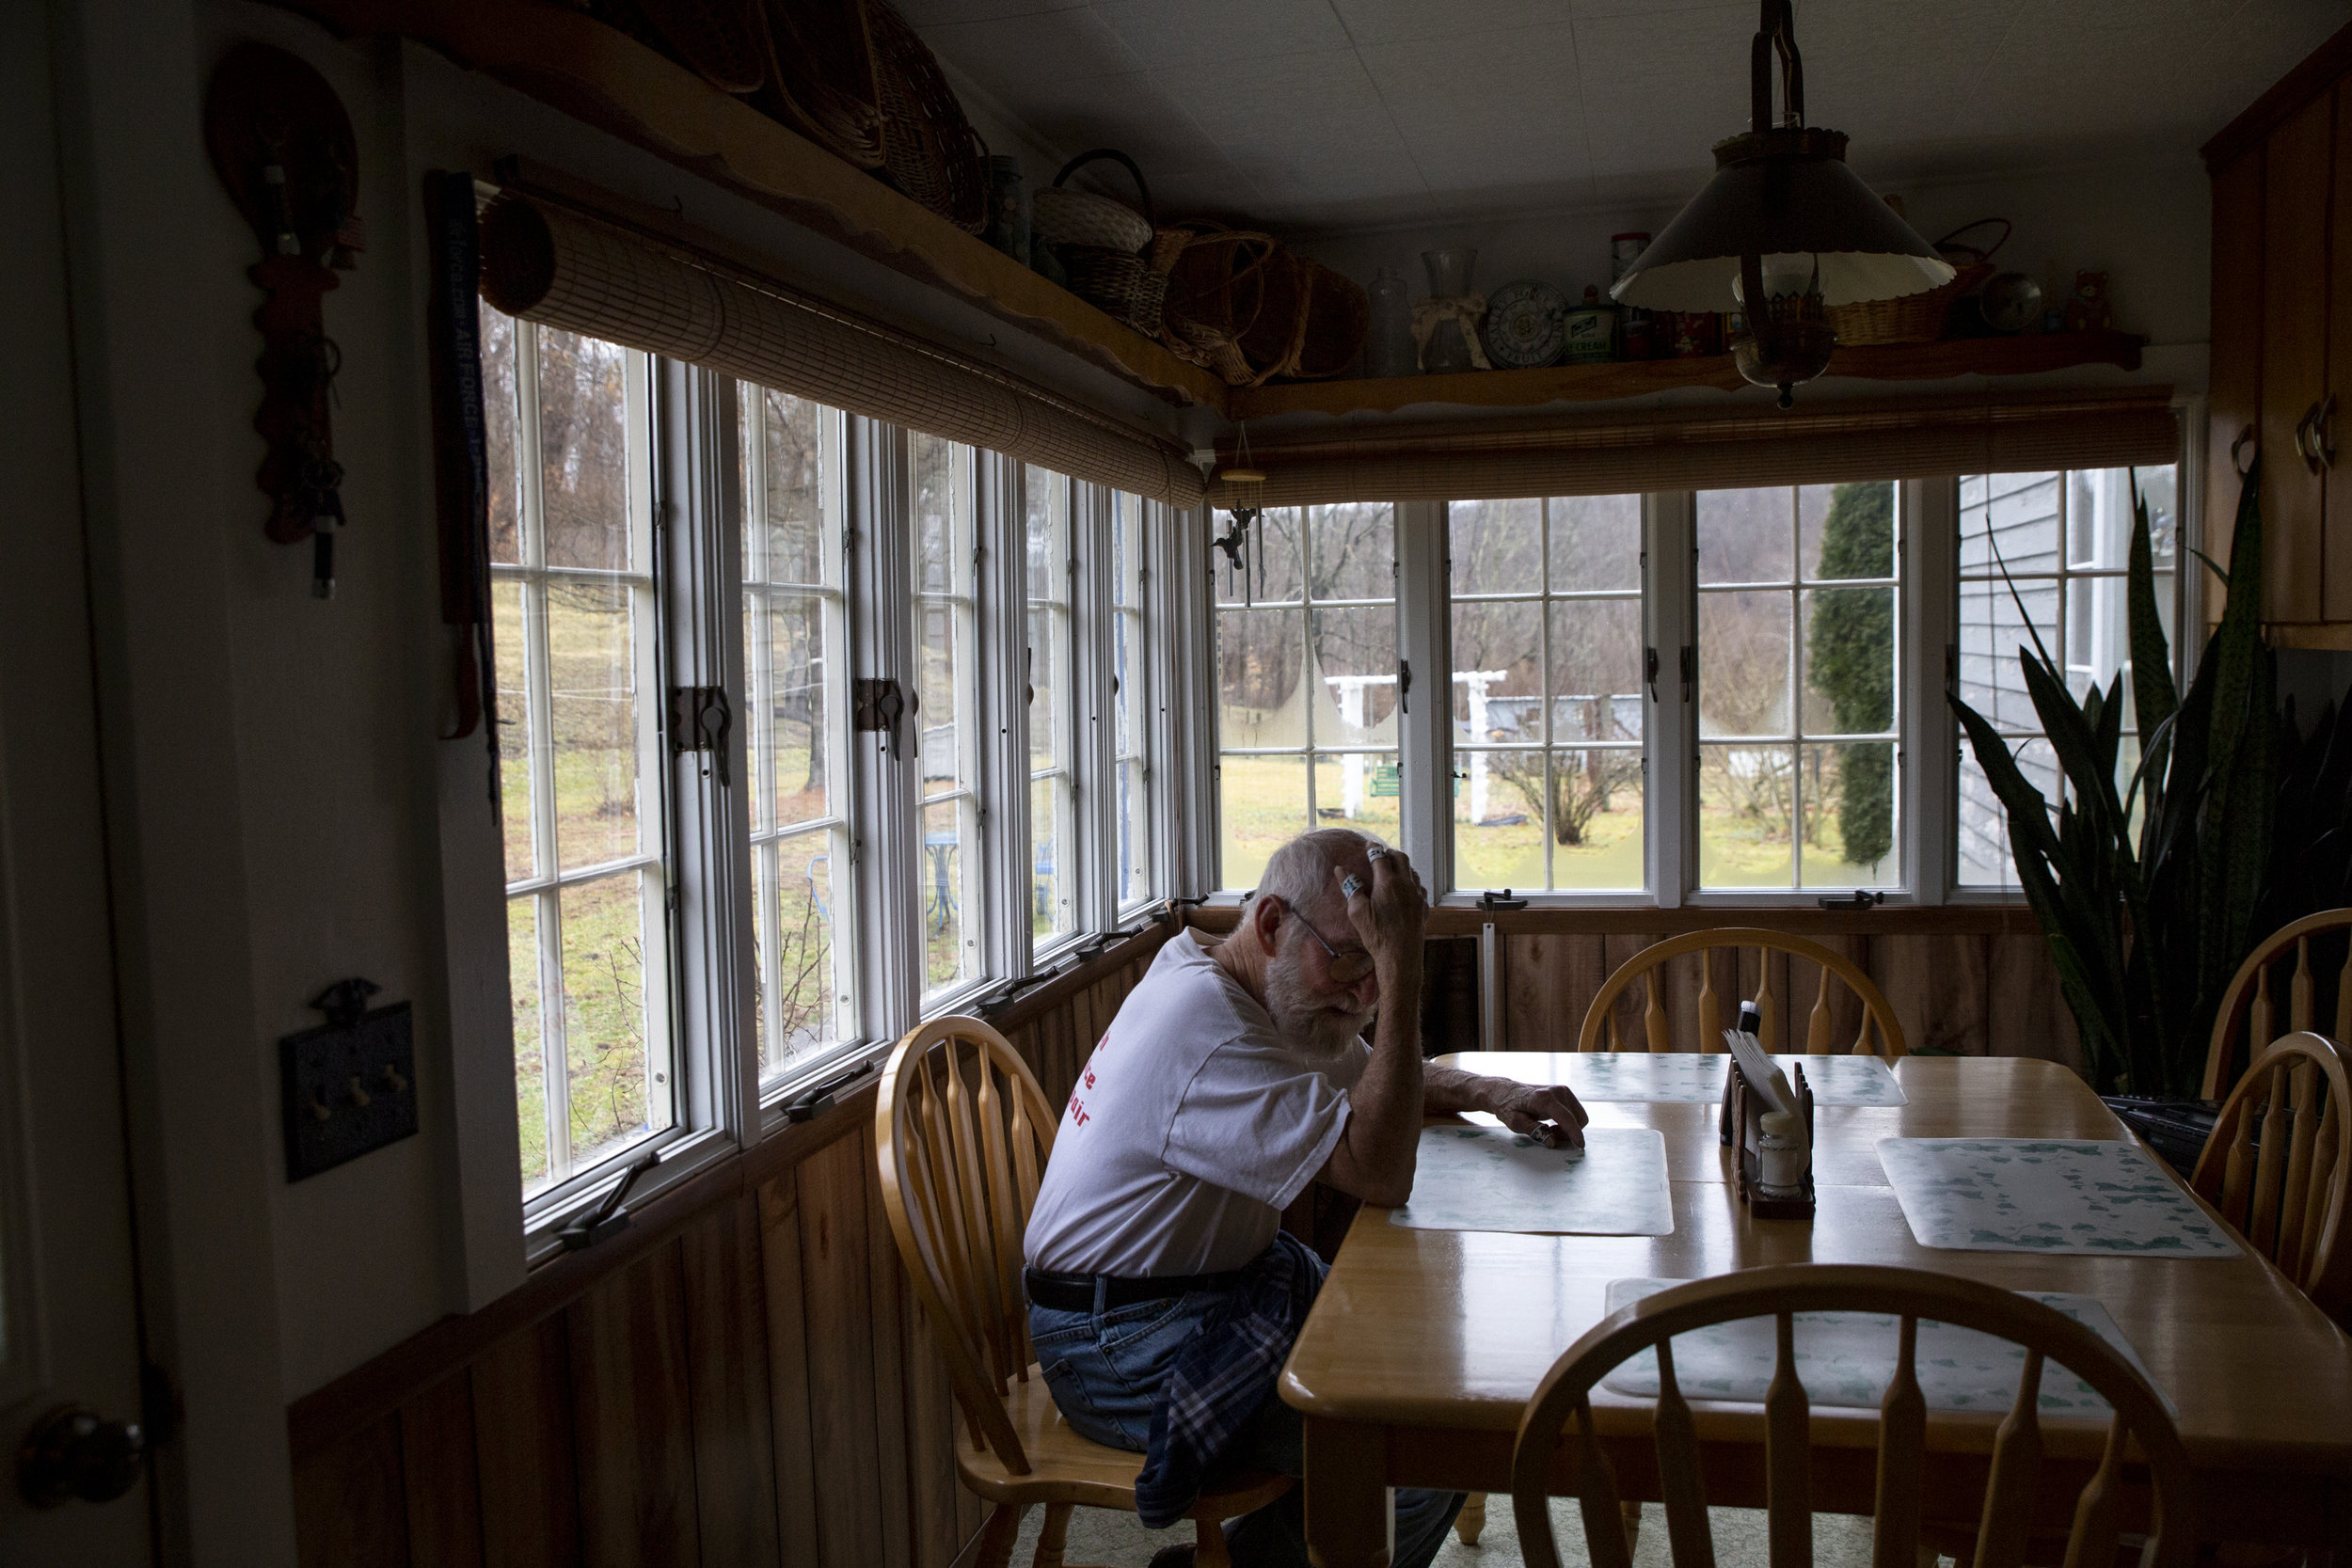  Bobby Spaulding, 82, rests in his kitchen after feeding his 15 cattle. Although he is battling cancer for a second time, Spaulding continues to raise cattle with his wife in order to afford their home. While he would like to sell the farm, his wife 